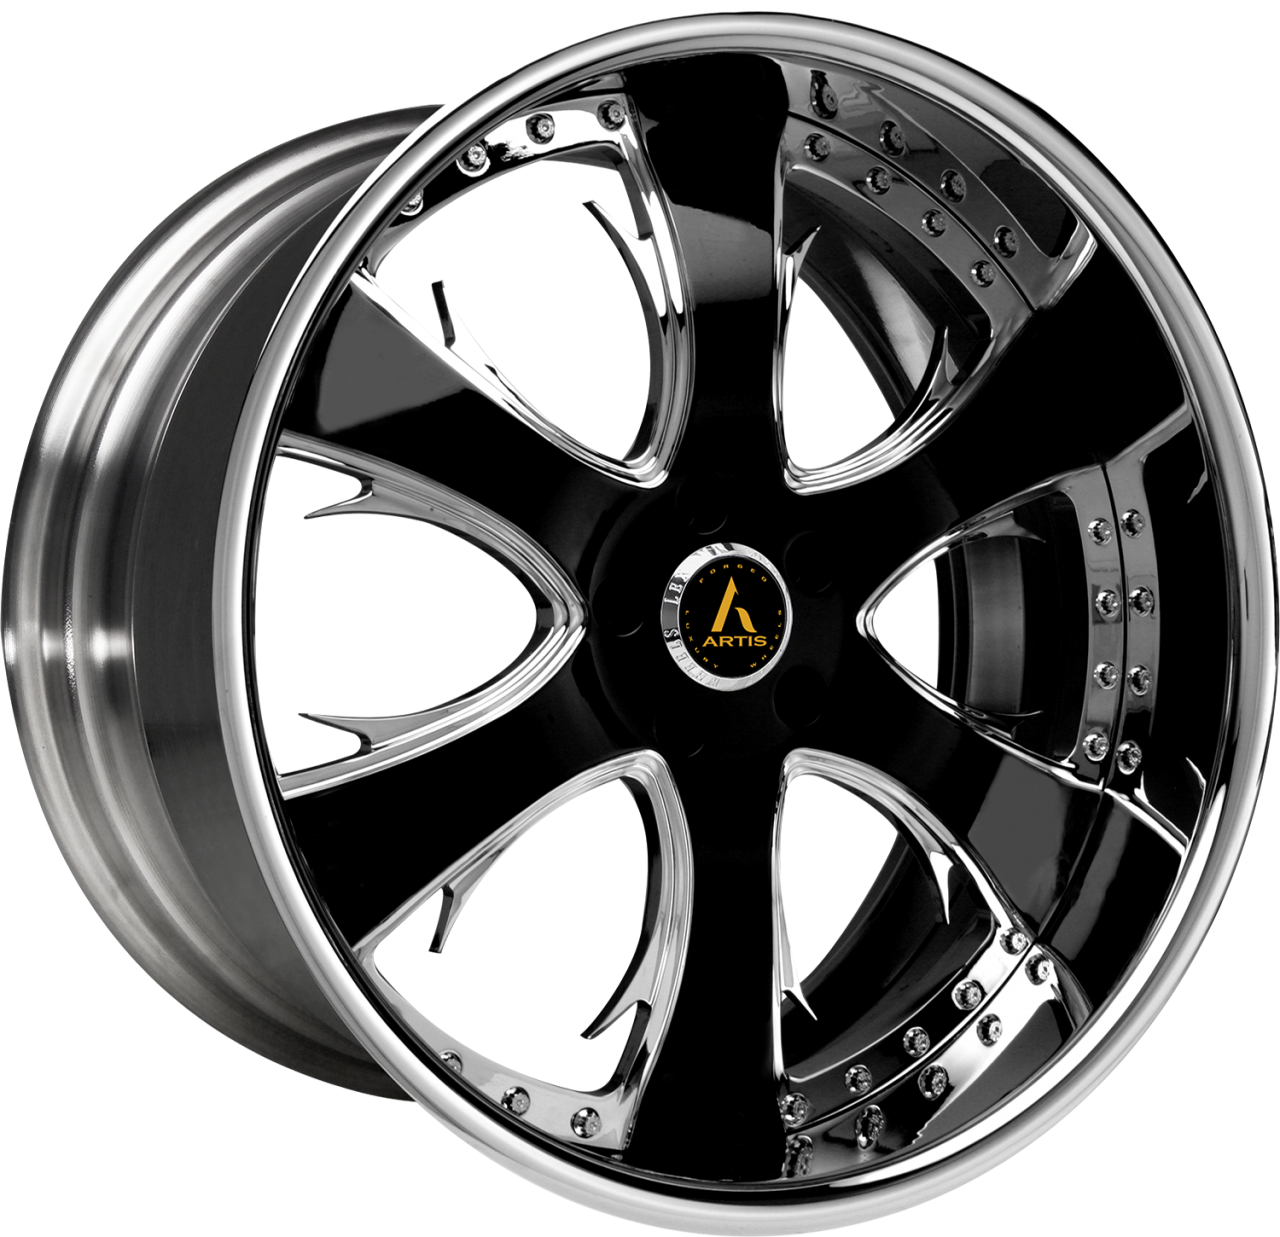 Artis Forged Cruces wheel with Black and Chrome finish